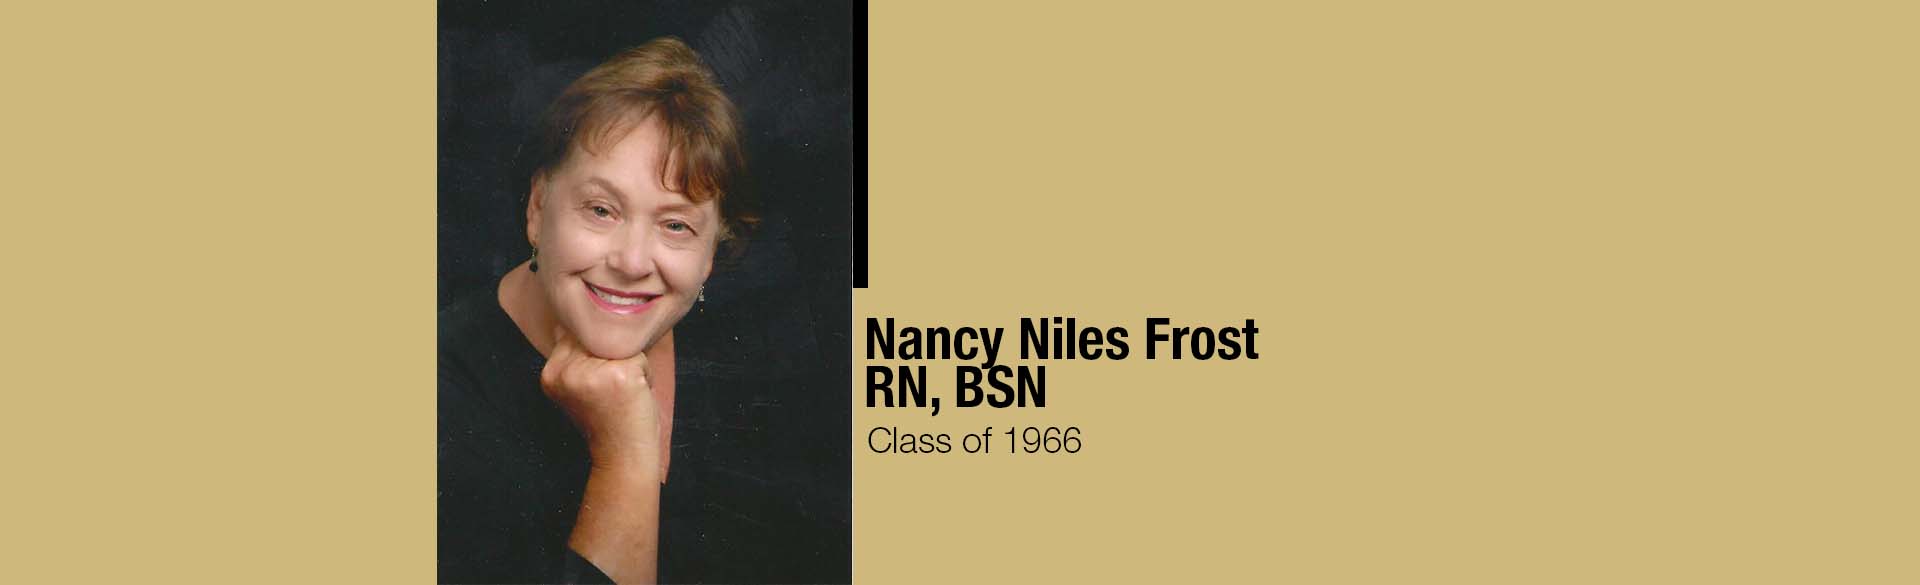 Nancy Niles Frost, RN, BSN Class of 1966 AddThis Sharing Buttons Share to Facebook Share to Twitter